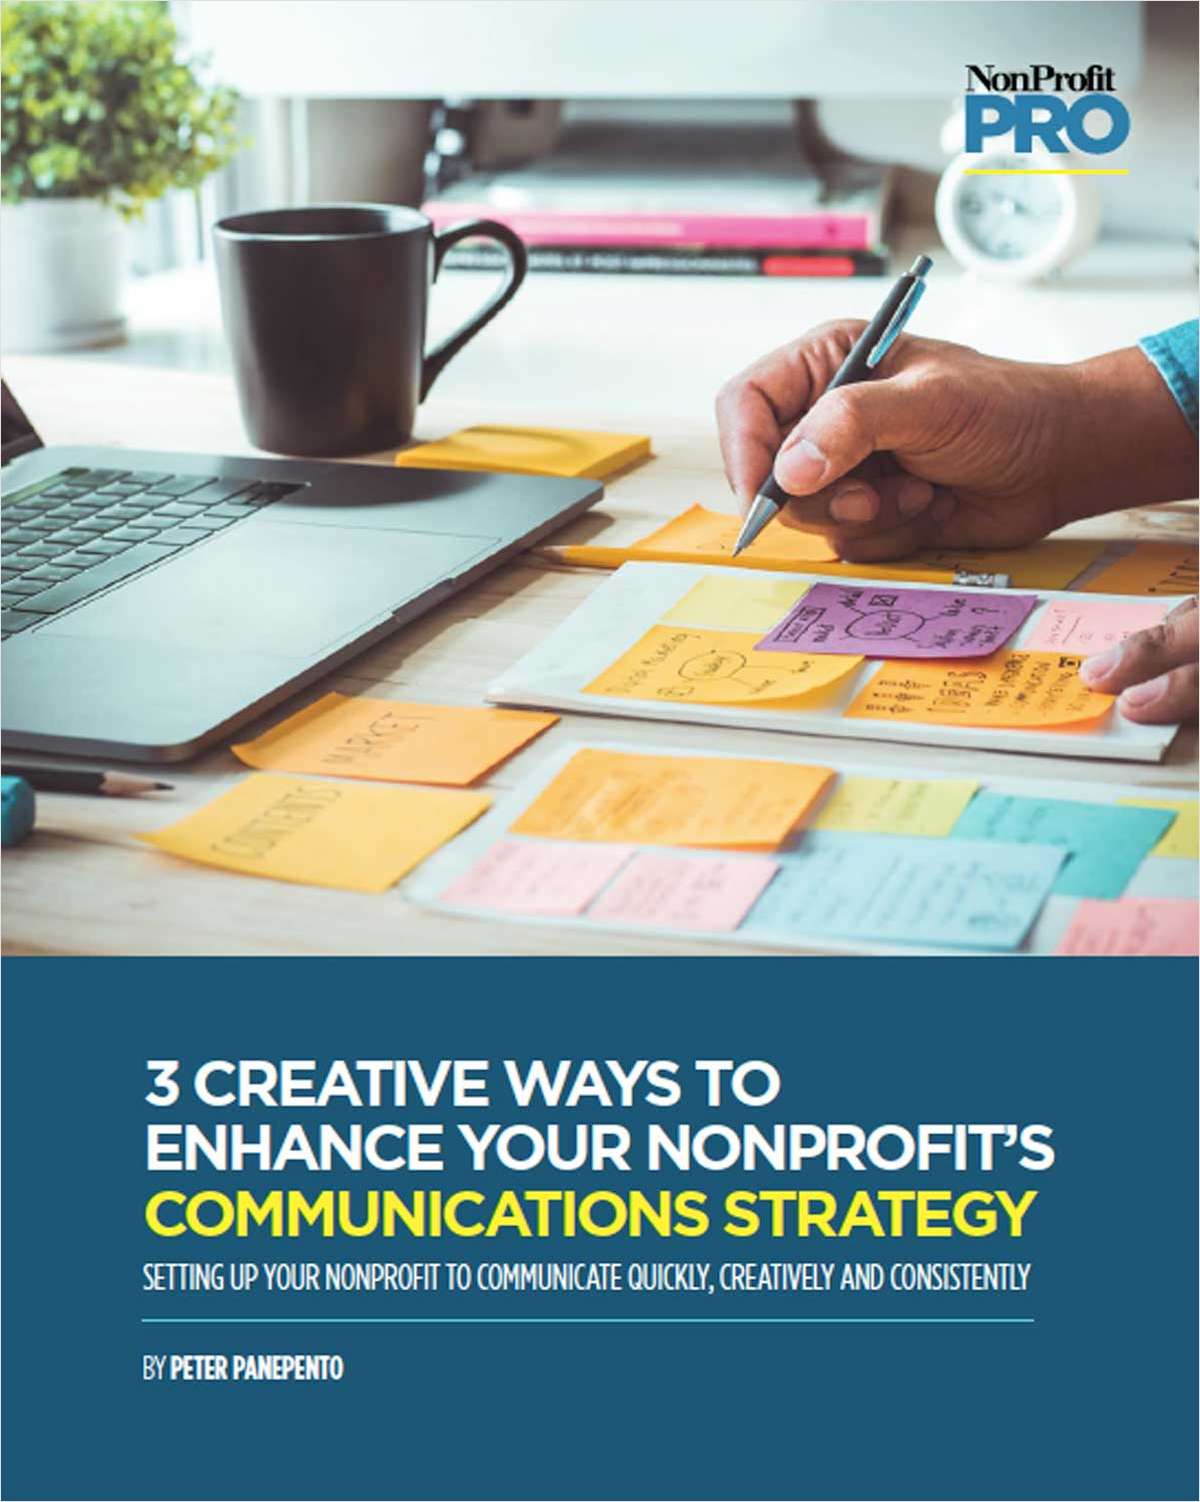 3 Creative Ways to Enhance Your Nonprofit's Communications Strategy